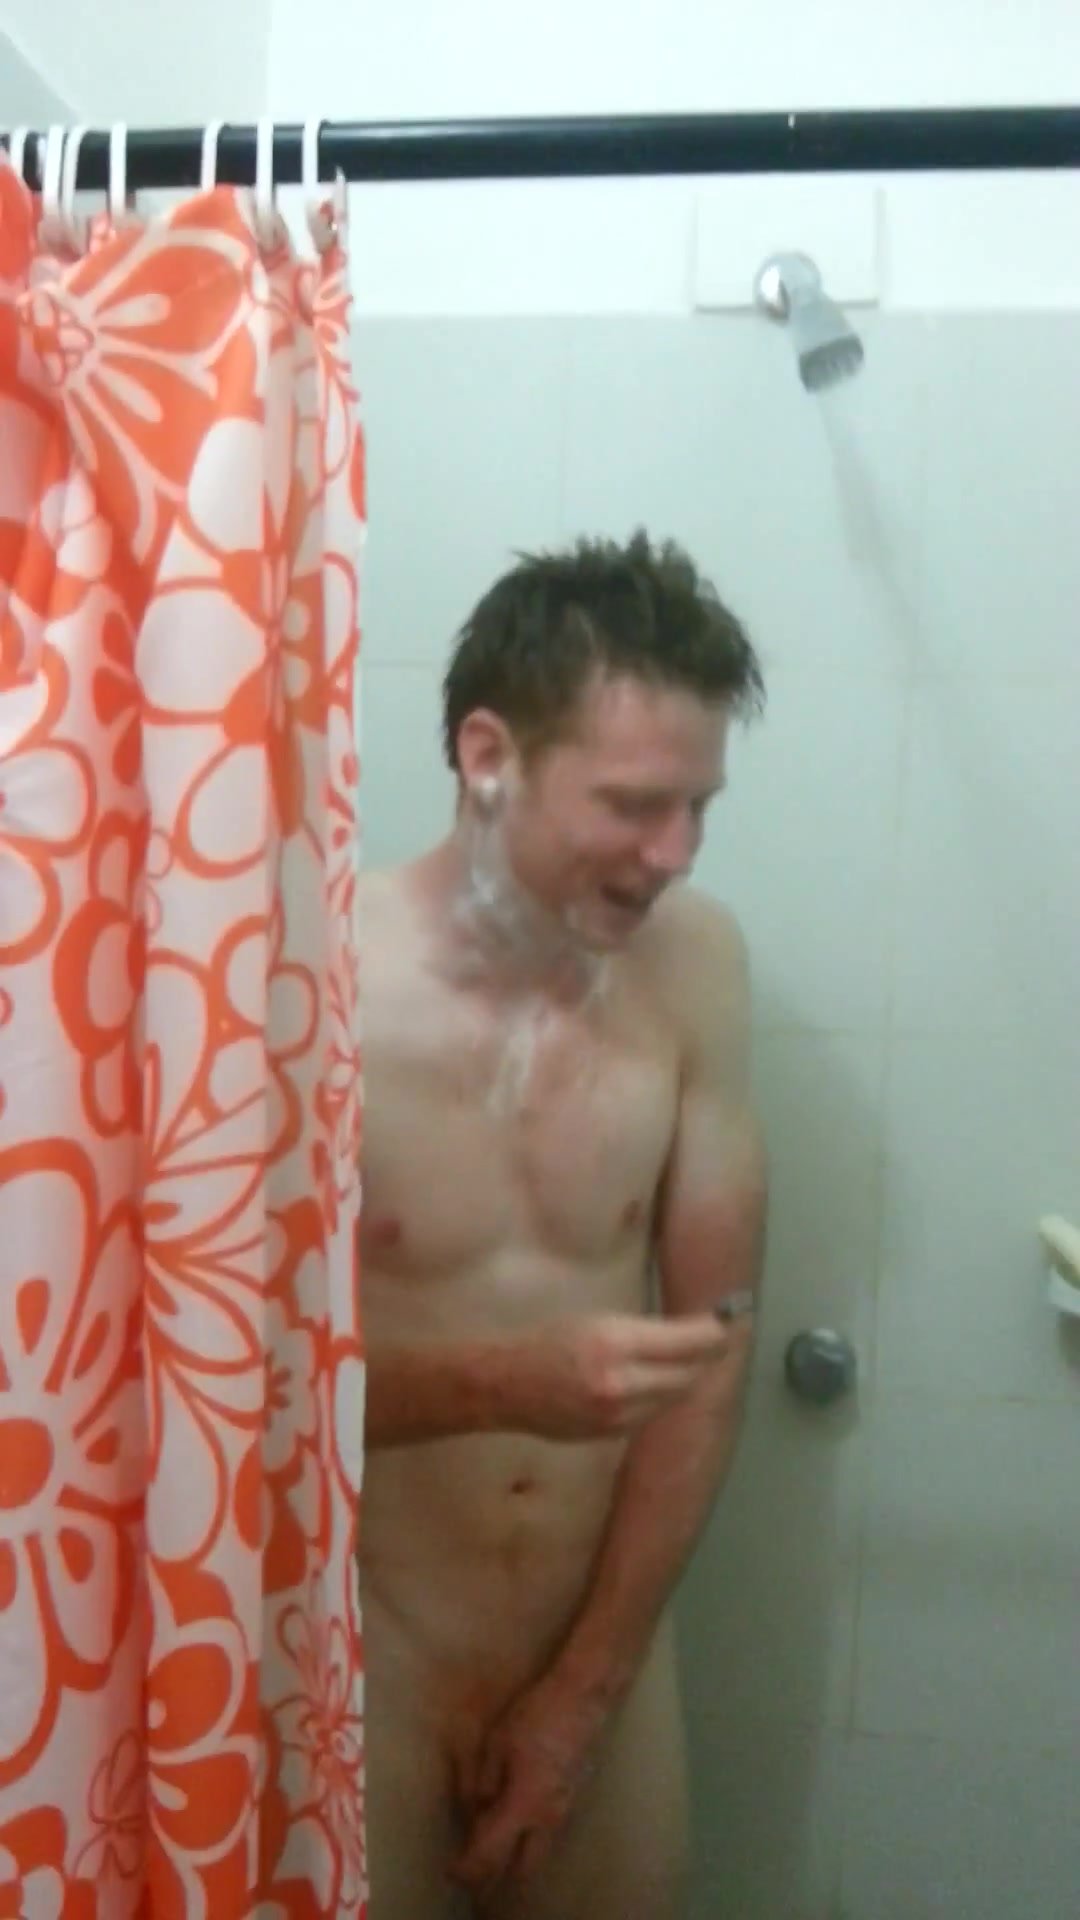 With friends _ Ginger guy scared by friend in shower